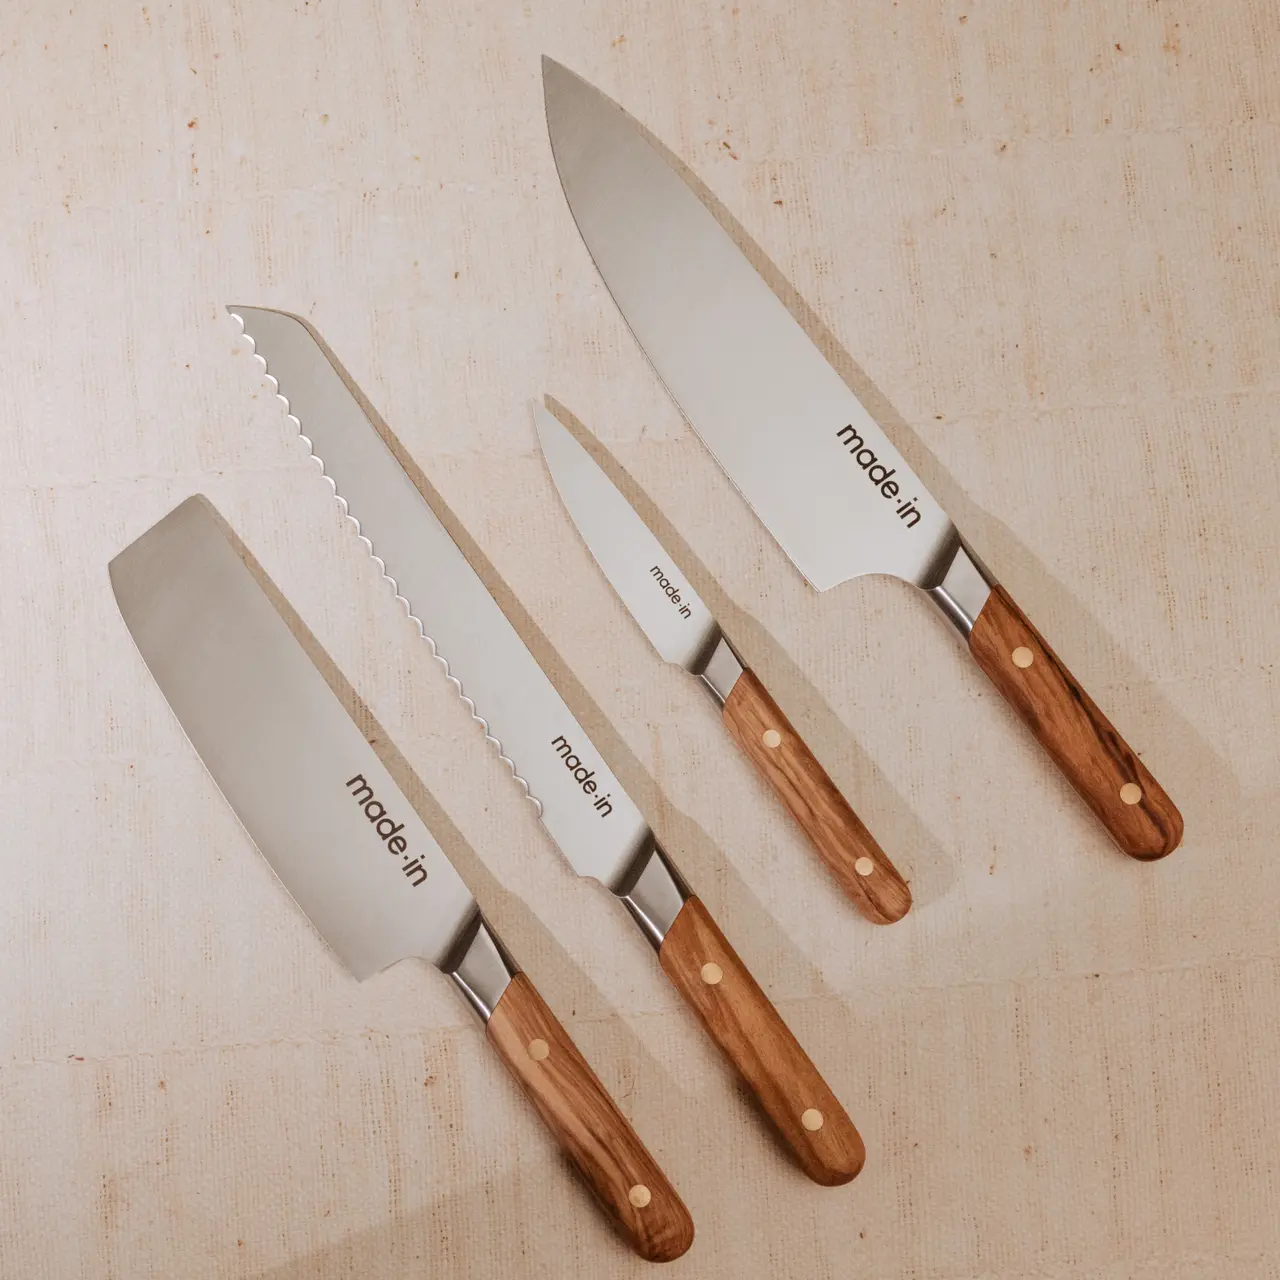 Hand forged quality 3-piece knive set with olive handle in luxury